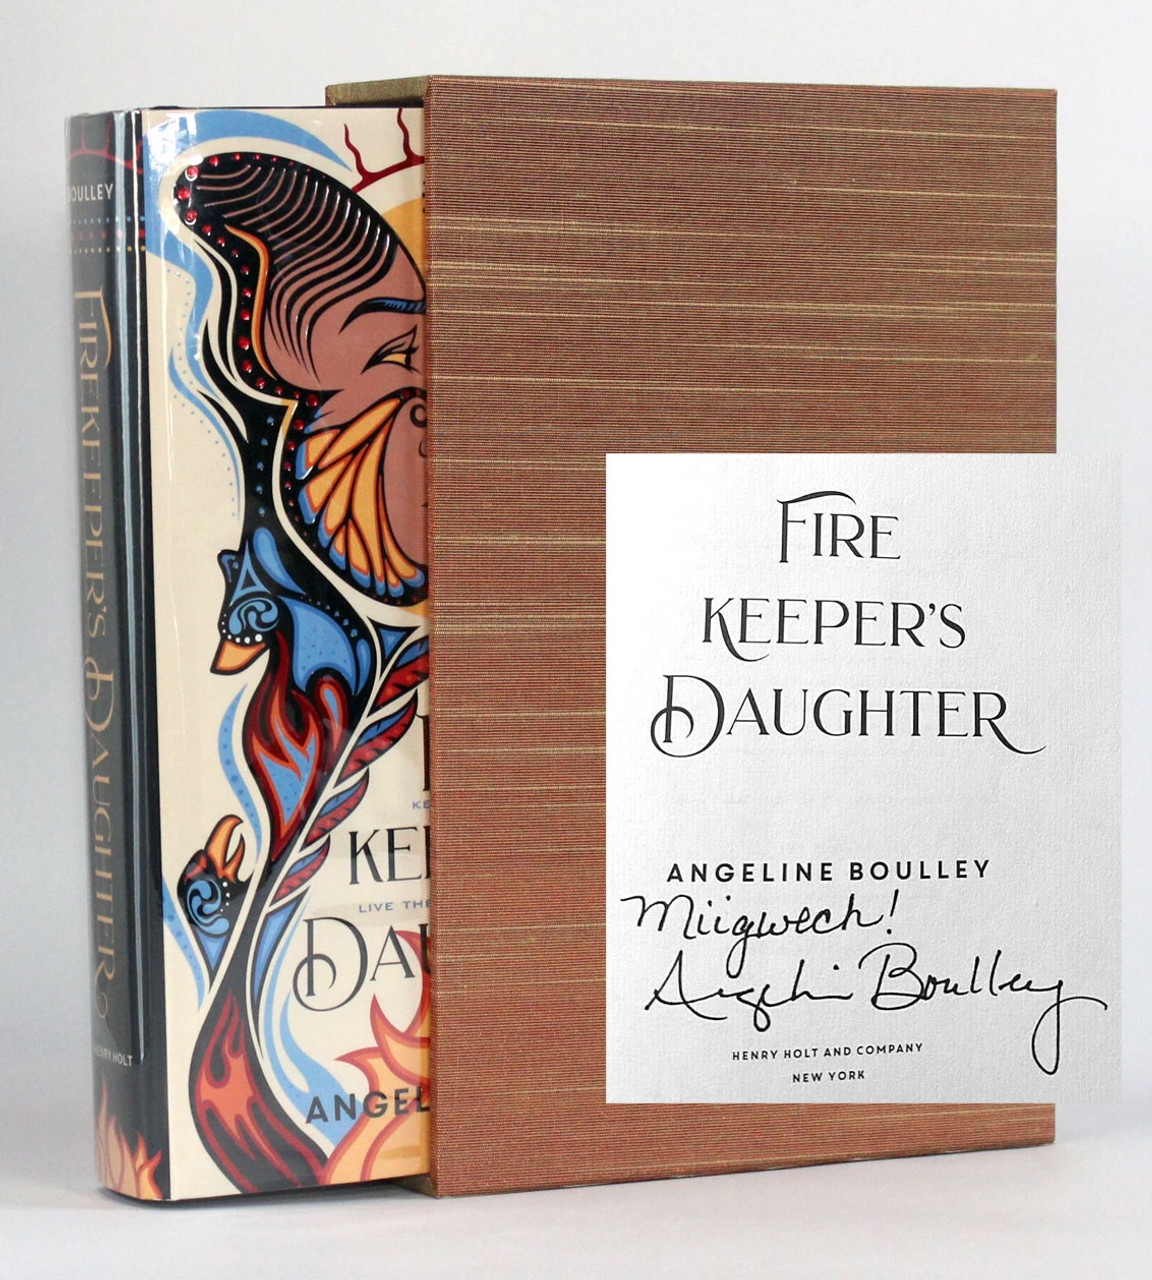 Angeline Boulley "Firekeeper's Daughter" Signed First Edition, First Printing, Slip-cased Limited Edition of 10 w/COA [Sealed]